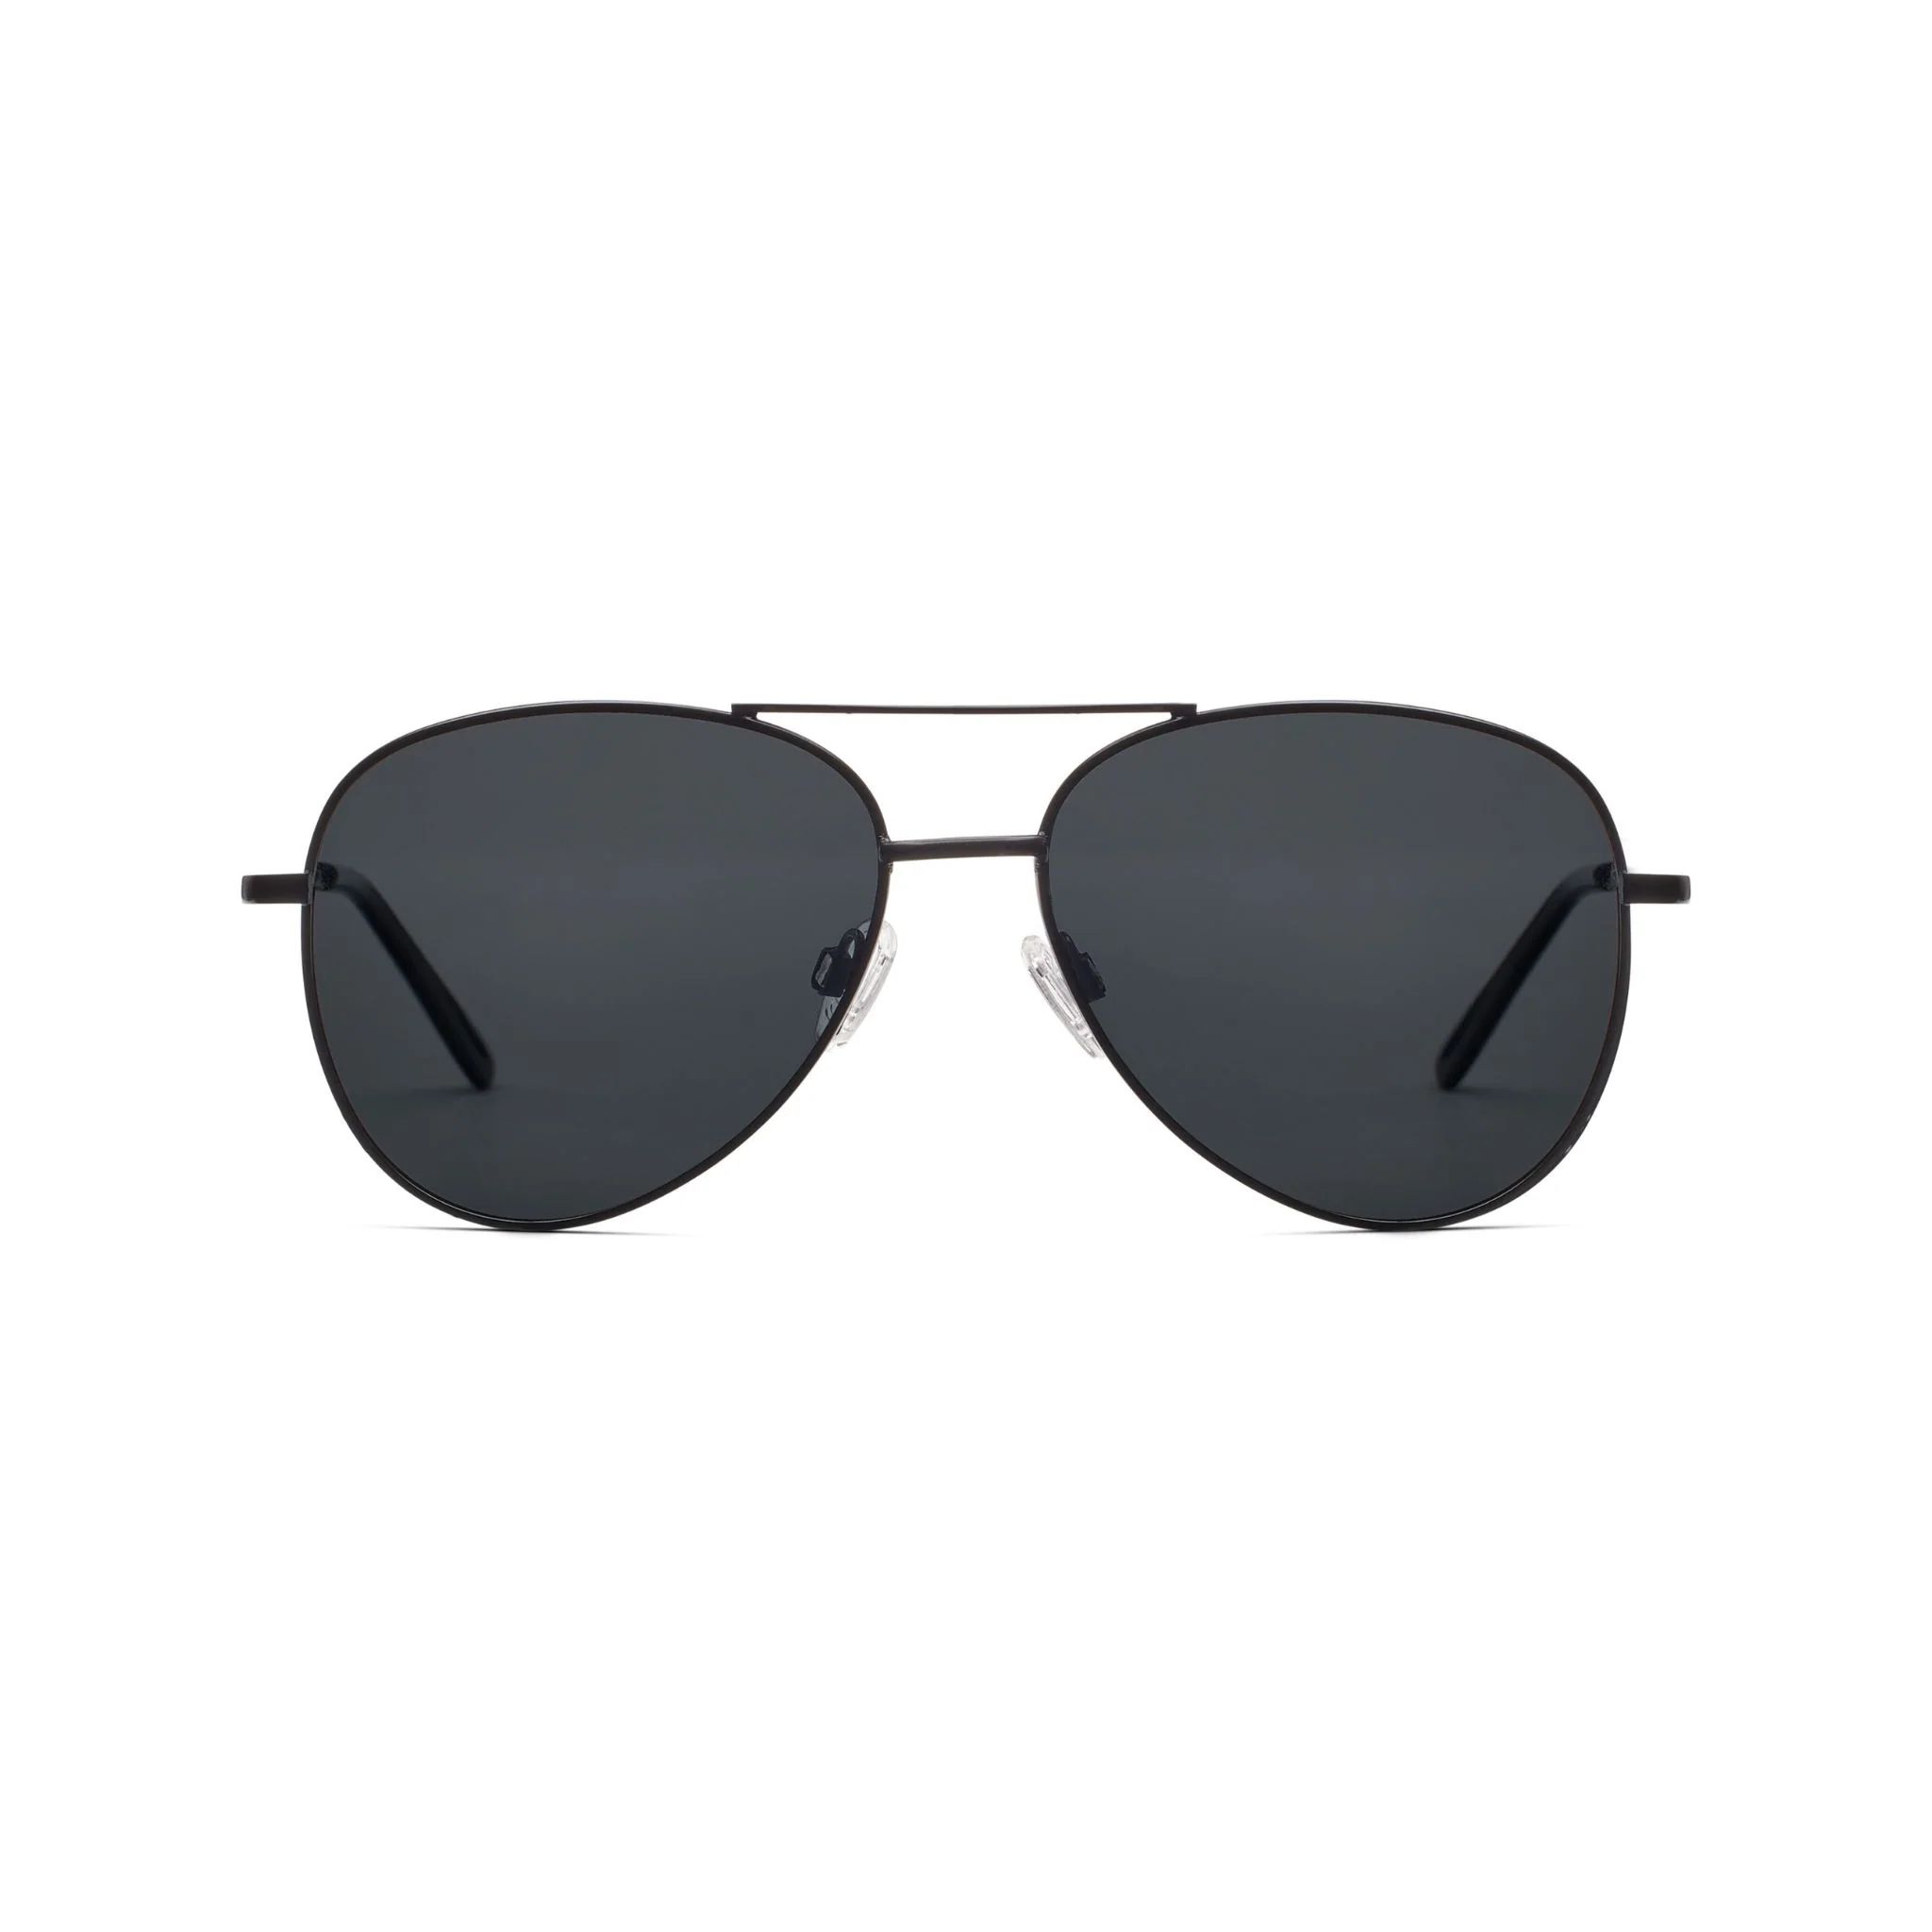 Stylish Ultraviolet Sunglasses | Peepers by PeeperSpecs - Peepers by PeeperSpecs | Peepers